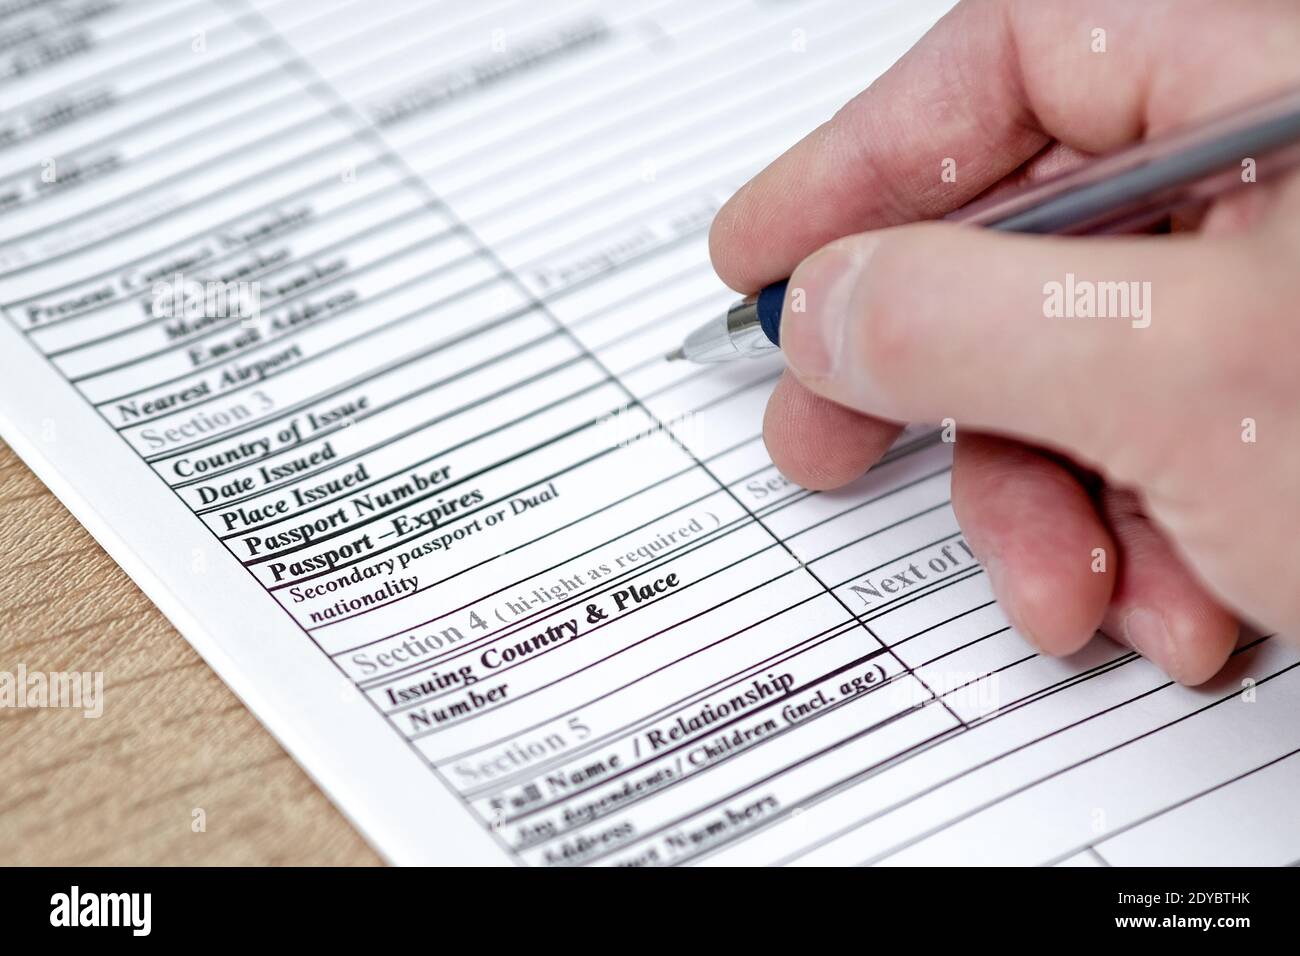 Filling in an application form for visa entry. Stock Photo